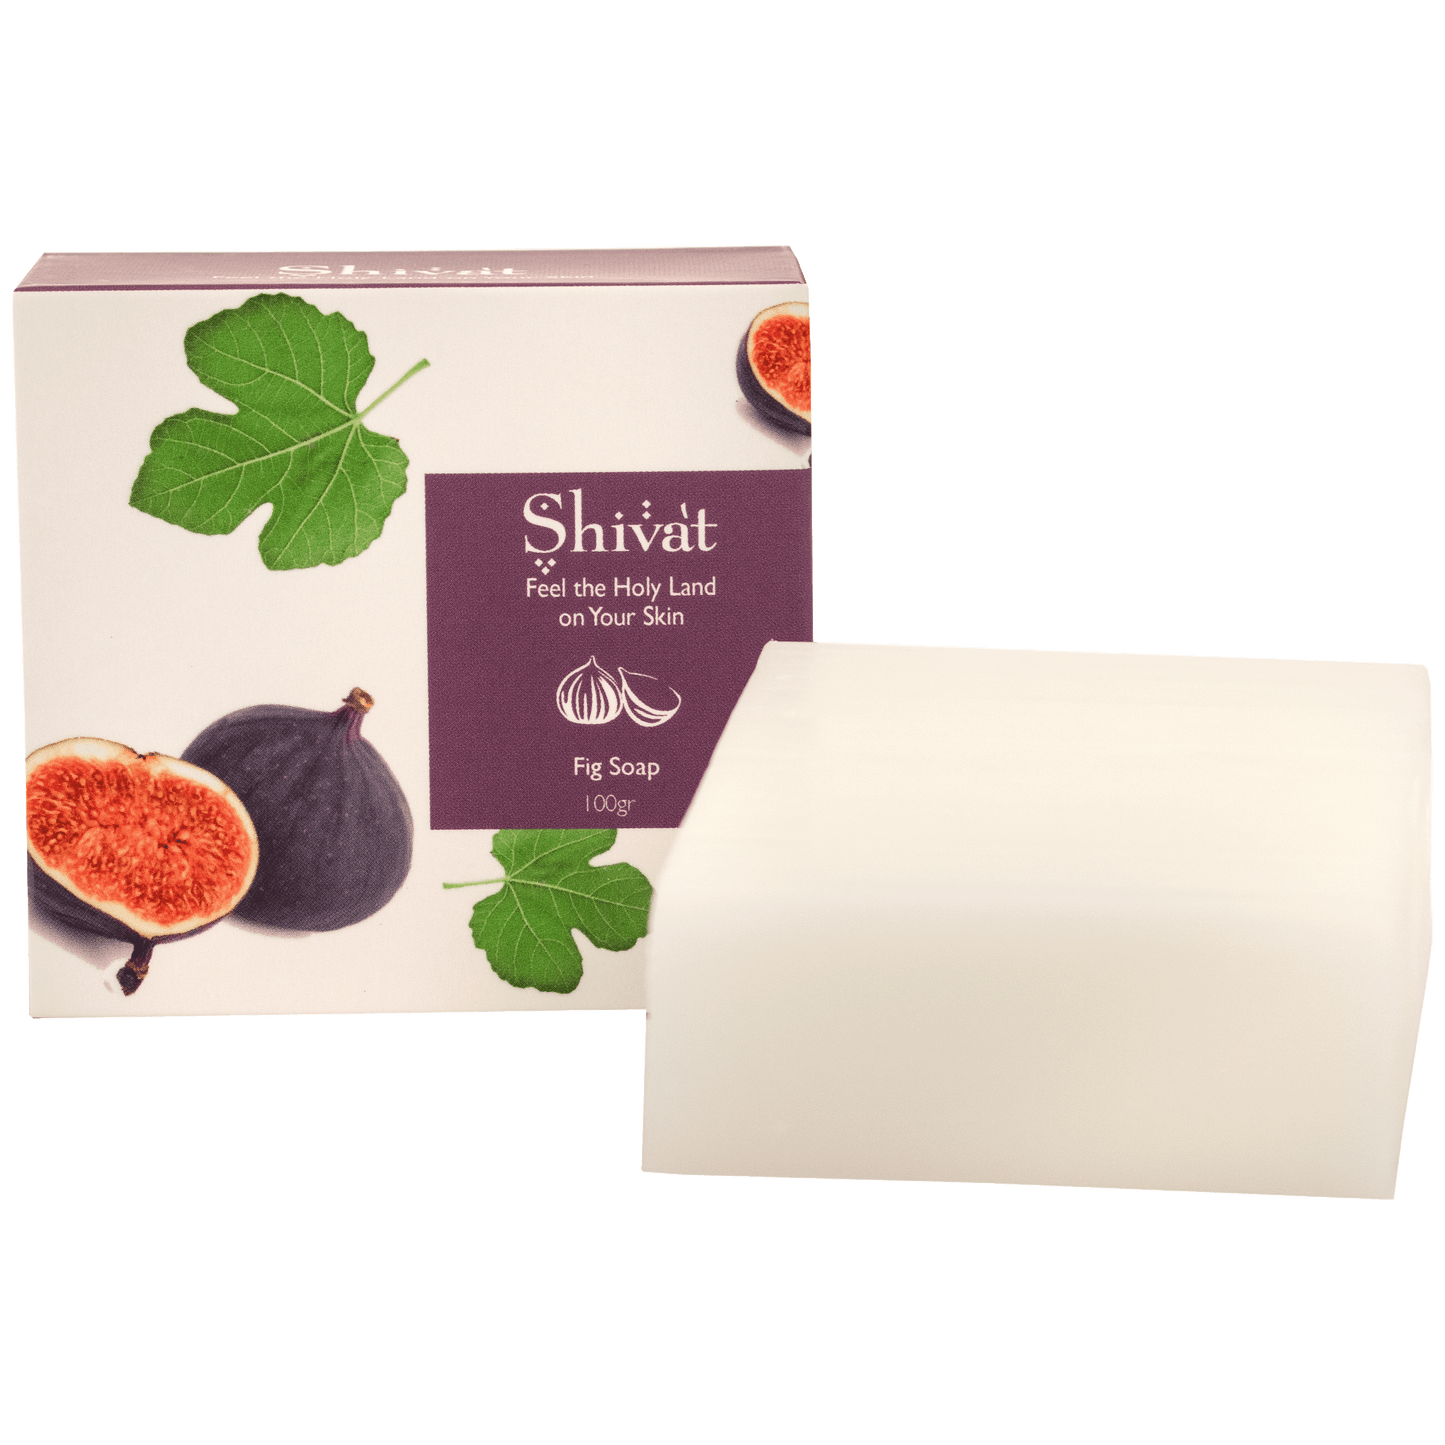 Creamy white Fig scented soap by Shivat